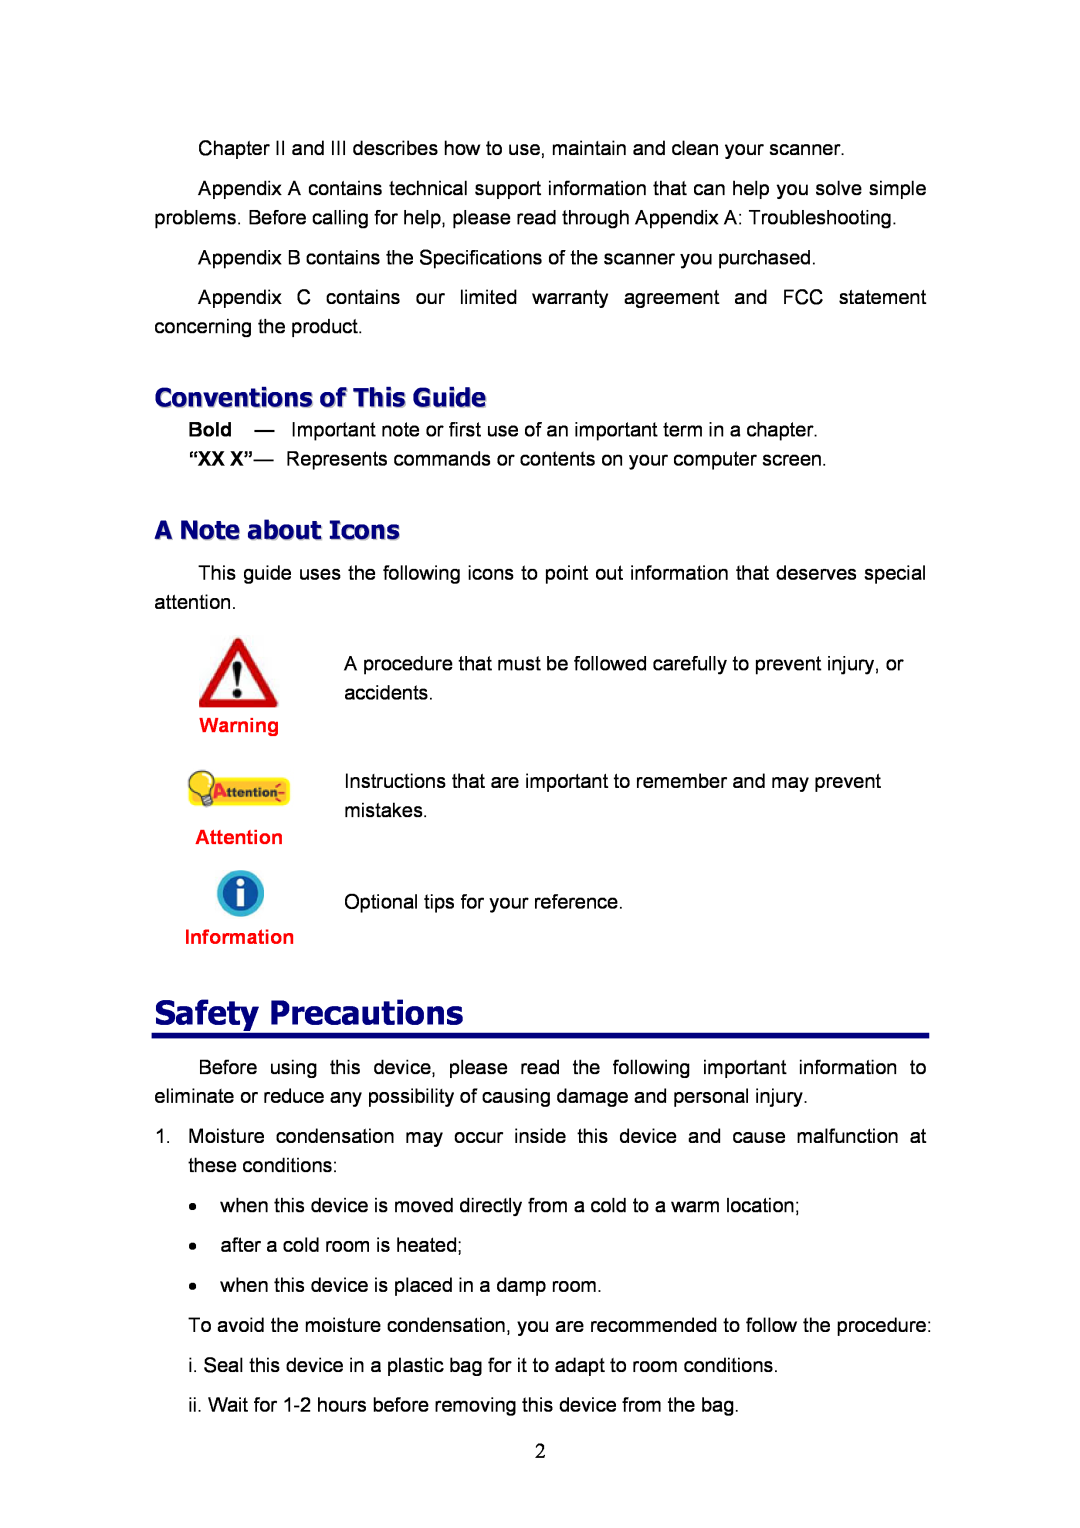 Plustek D600, MobileOffice Scanner manual Safety Precautions, Conventions of This Guide, A Note about Icons, Information 